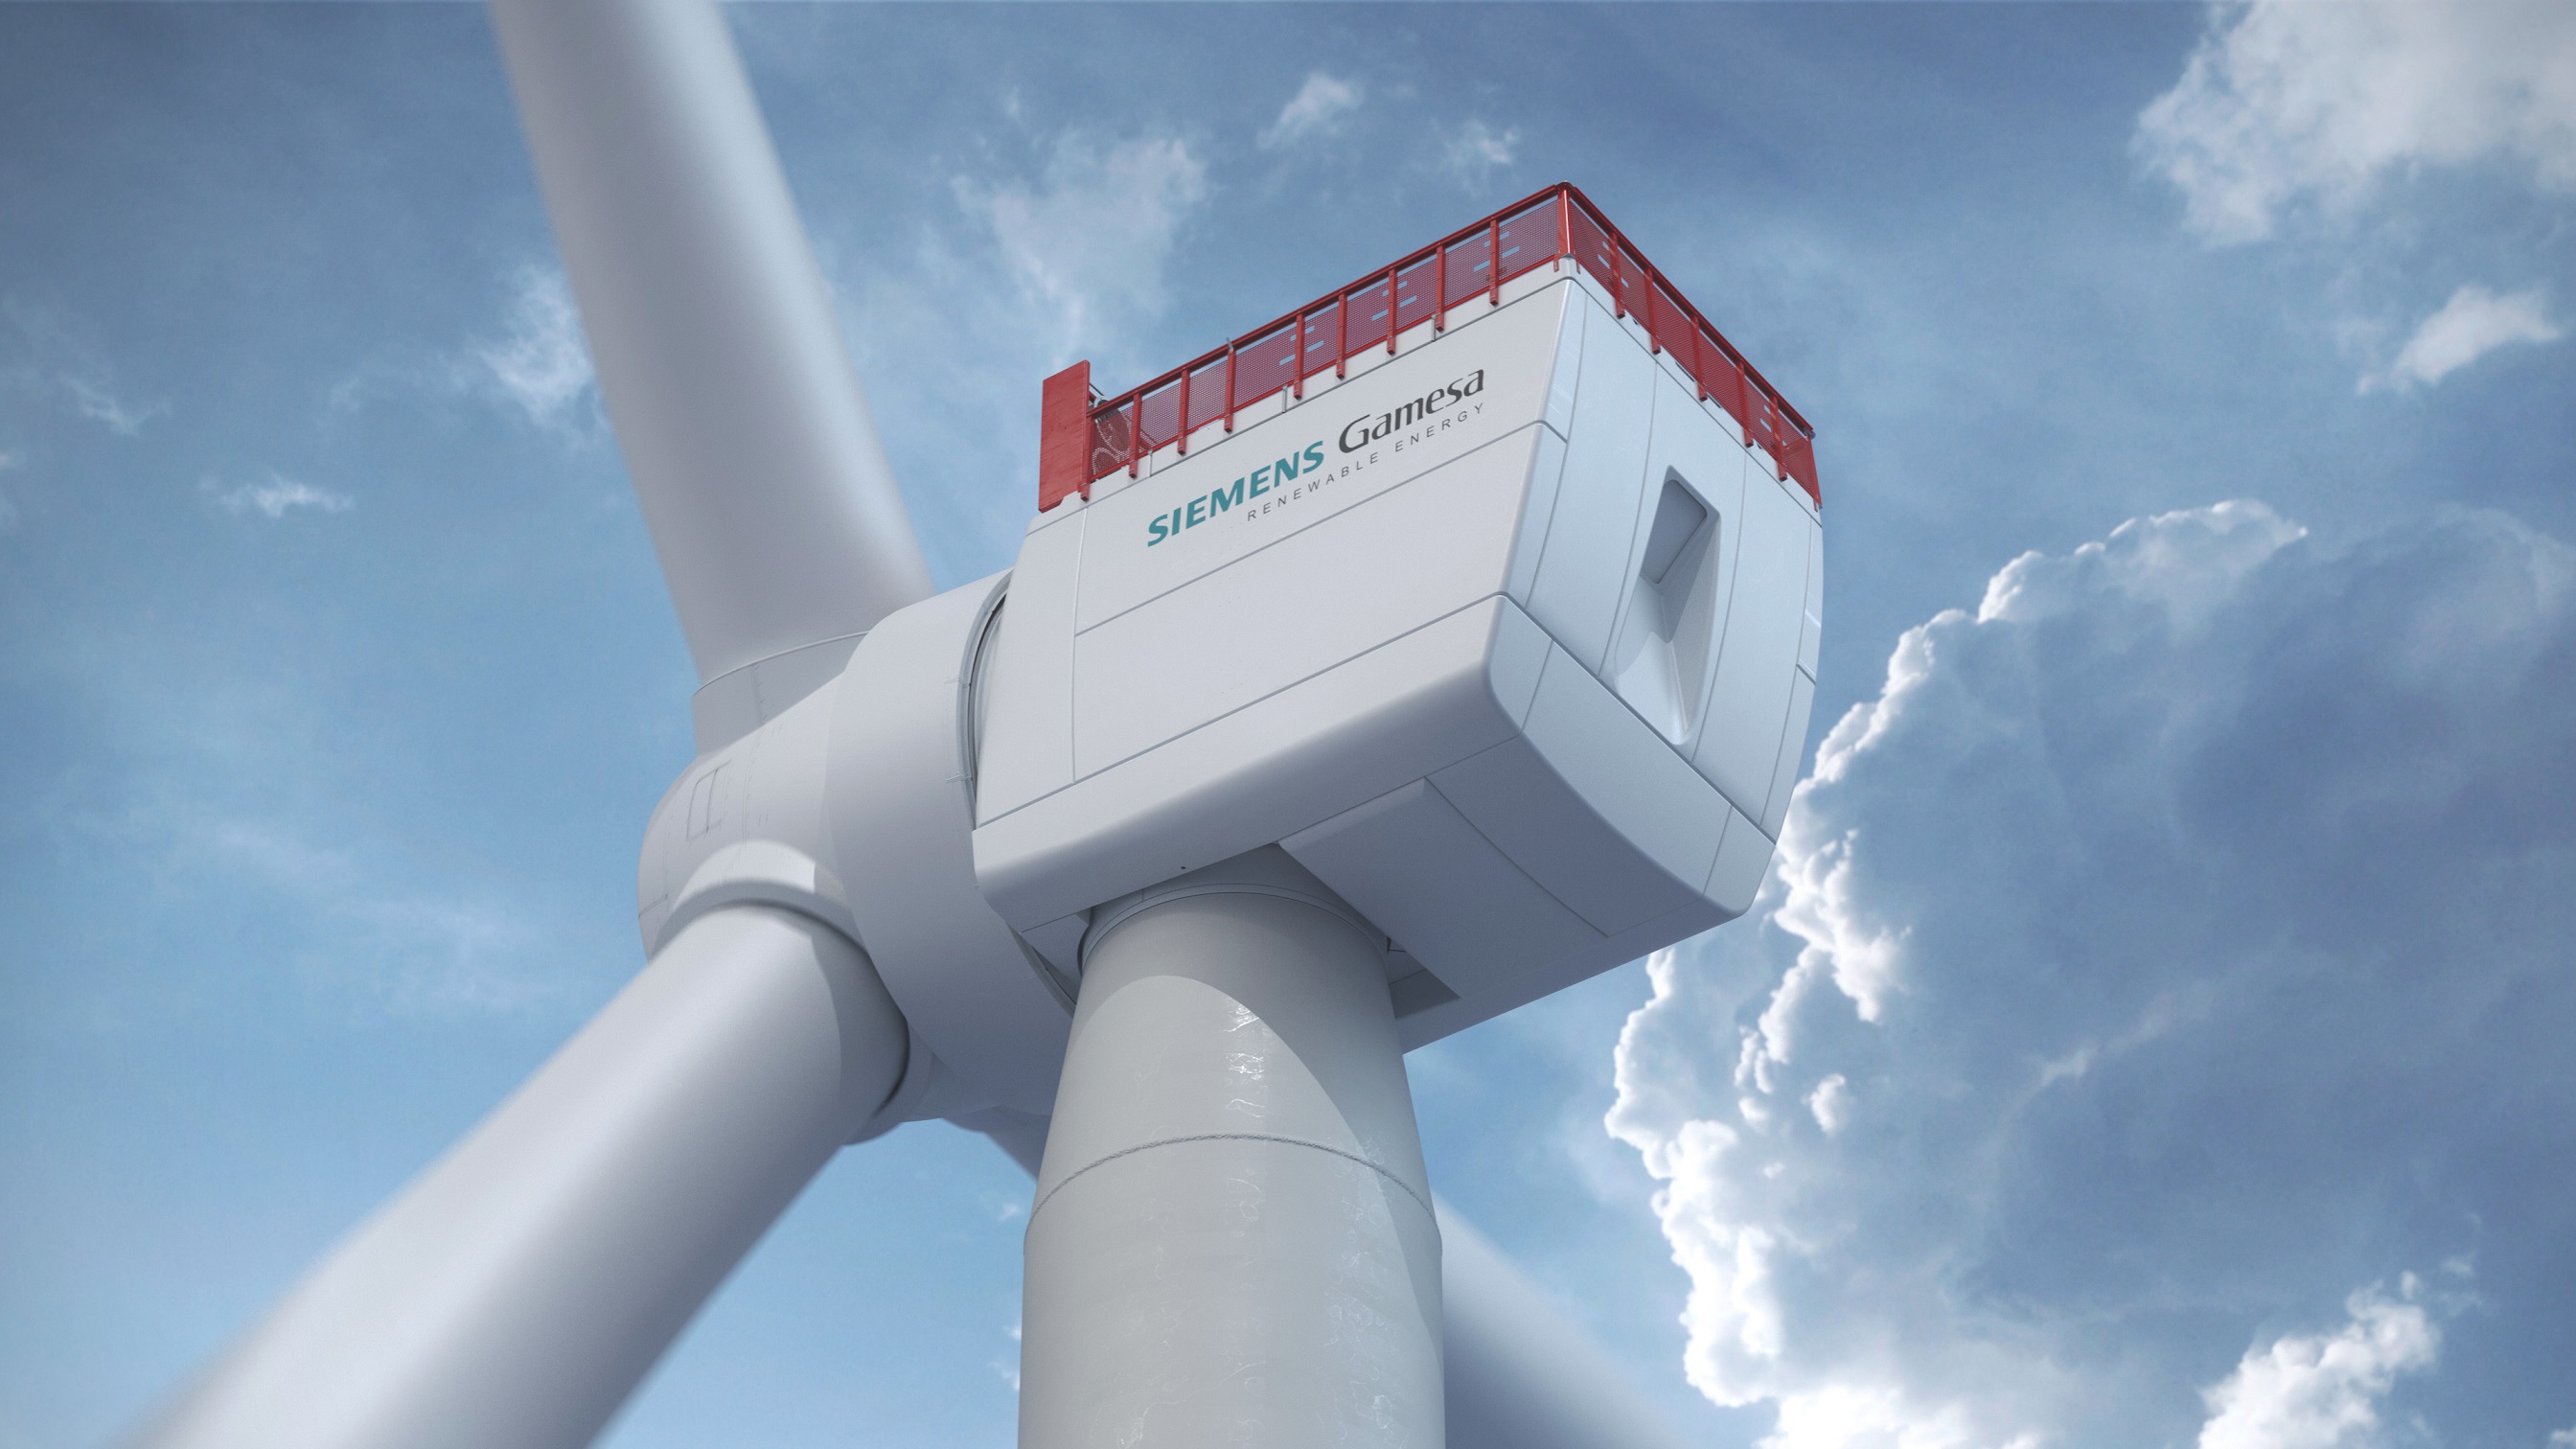 Taiwan debut for Siemens Gamesa offshore wind giant